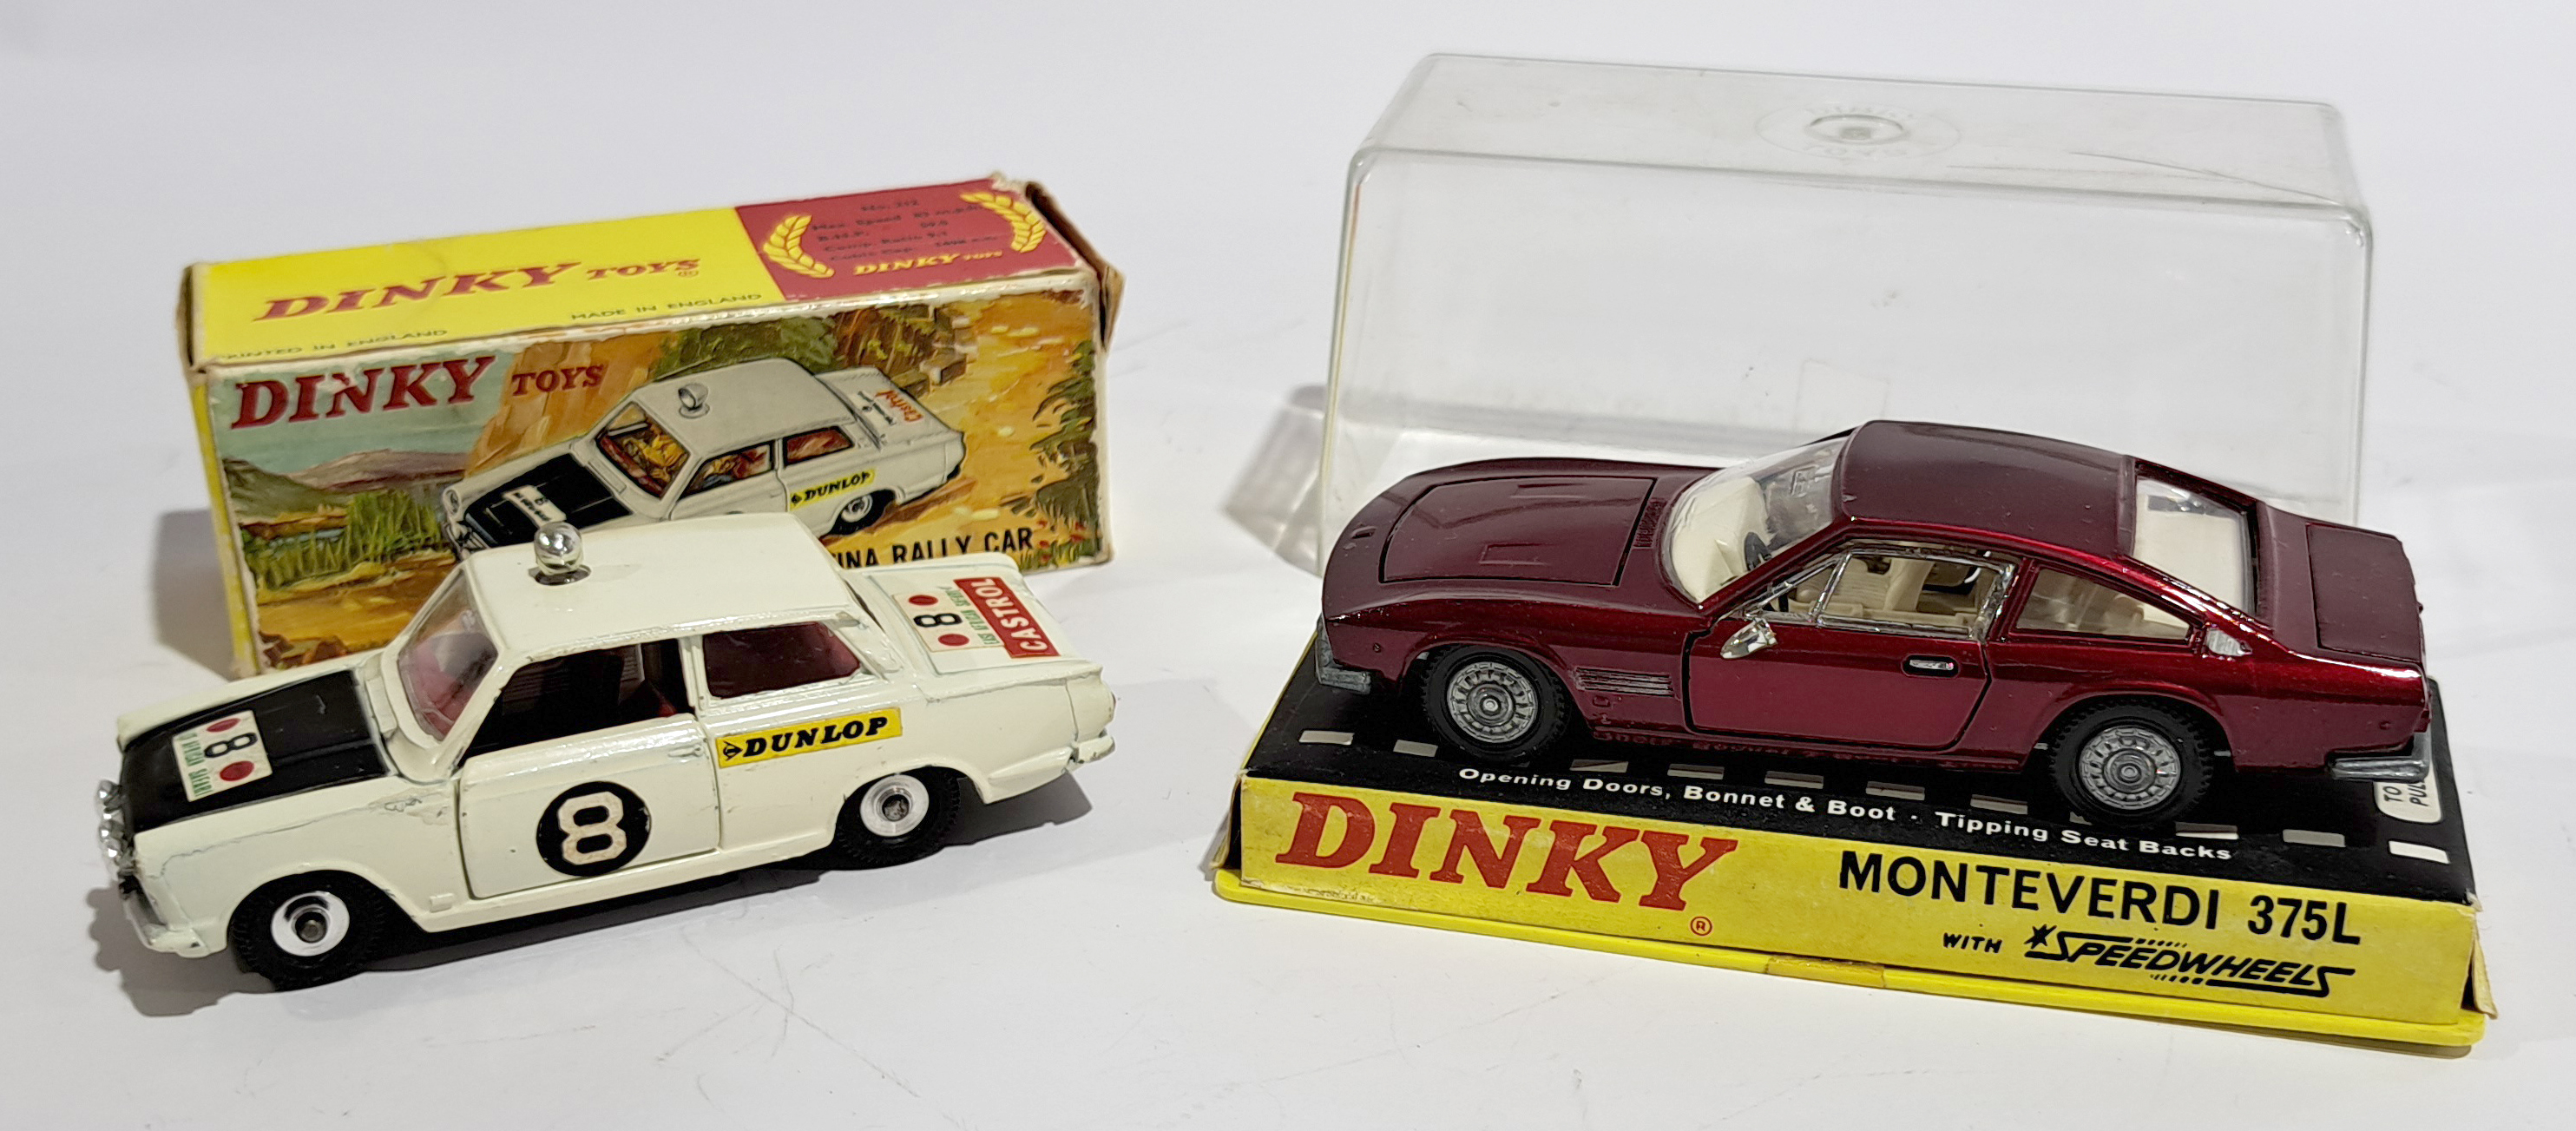 Dinky 212 Ford Cortina Rally Car & 190 Monteverdi 375L, a boxed pair